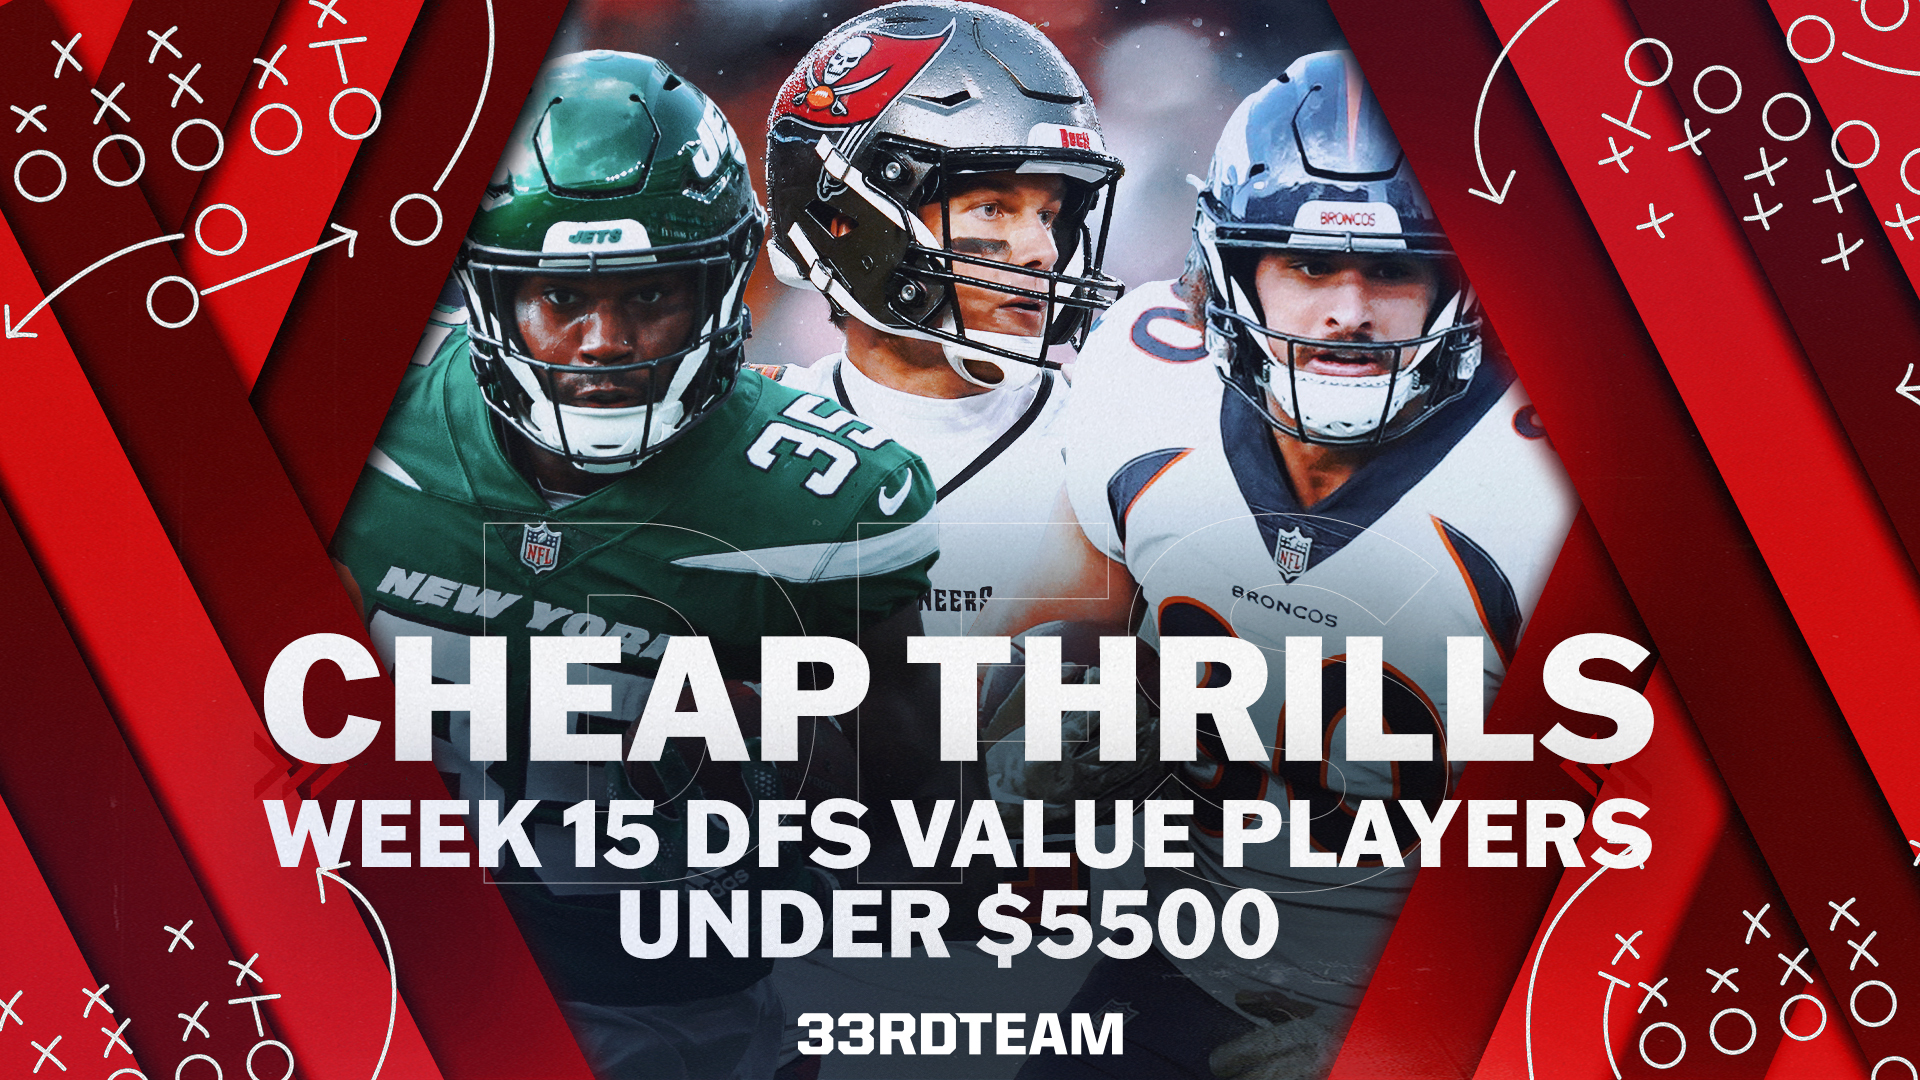 Week 15 DFS Value Players